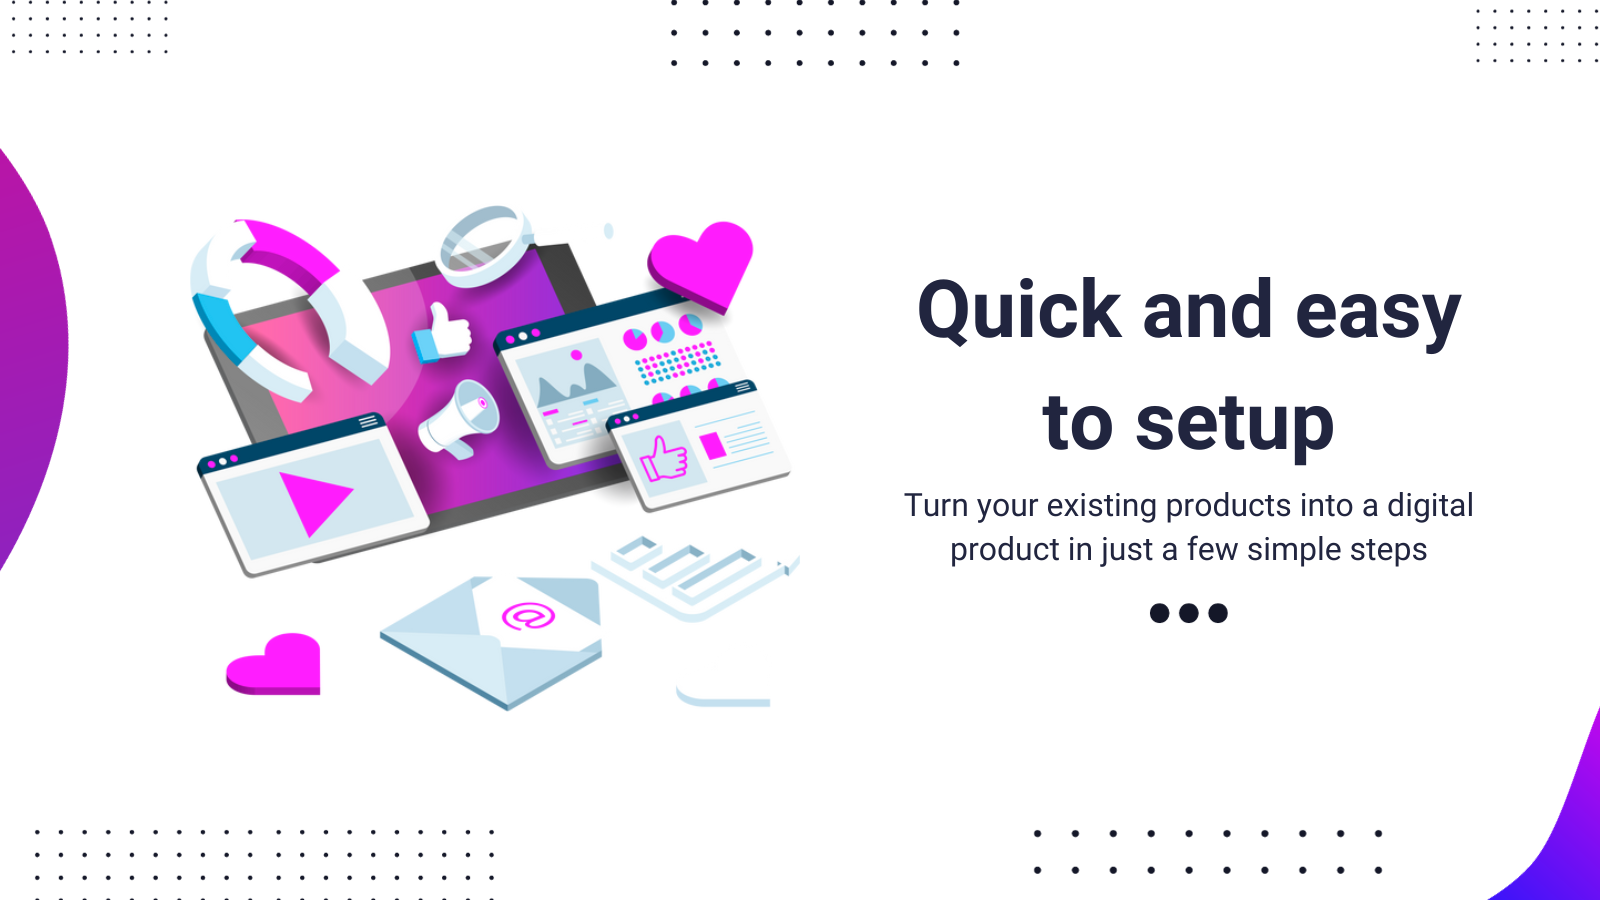 Turn your existing products into a digital products